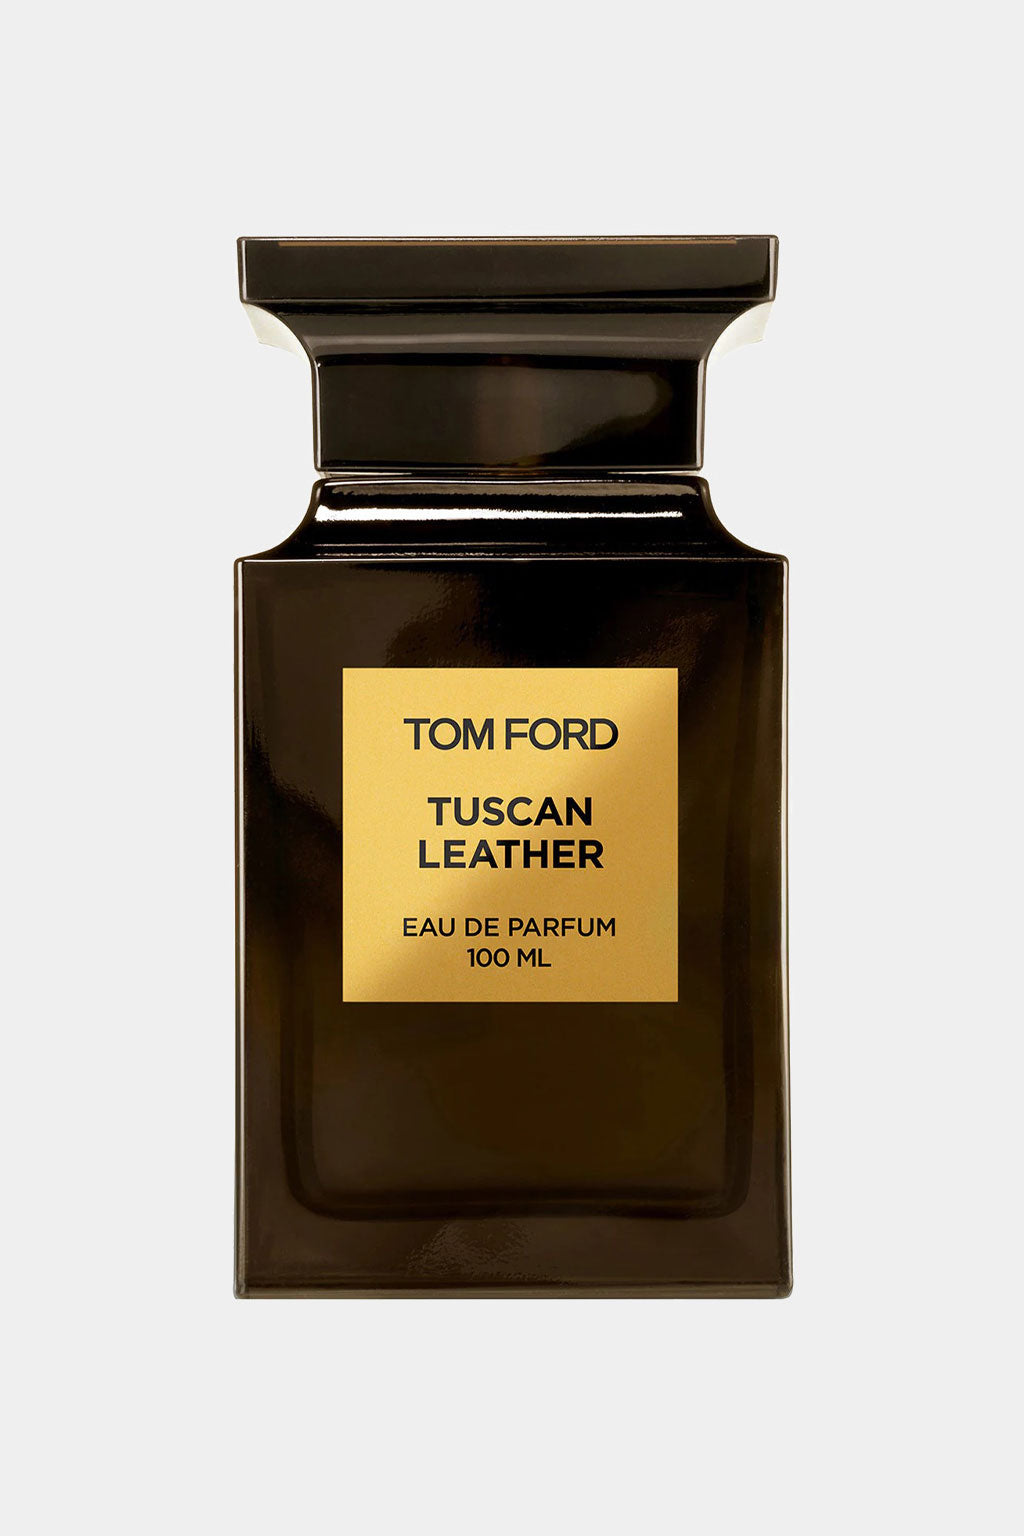 Tom Ford - Tuscan Leather Edp